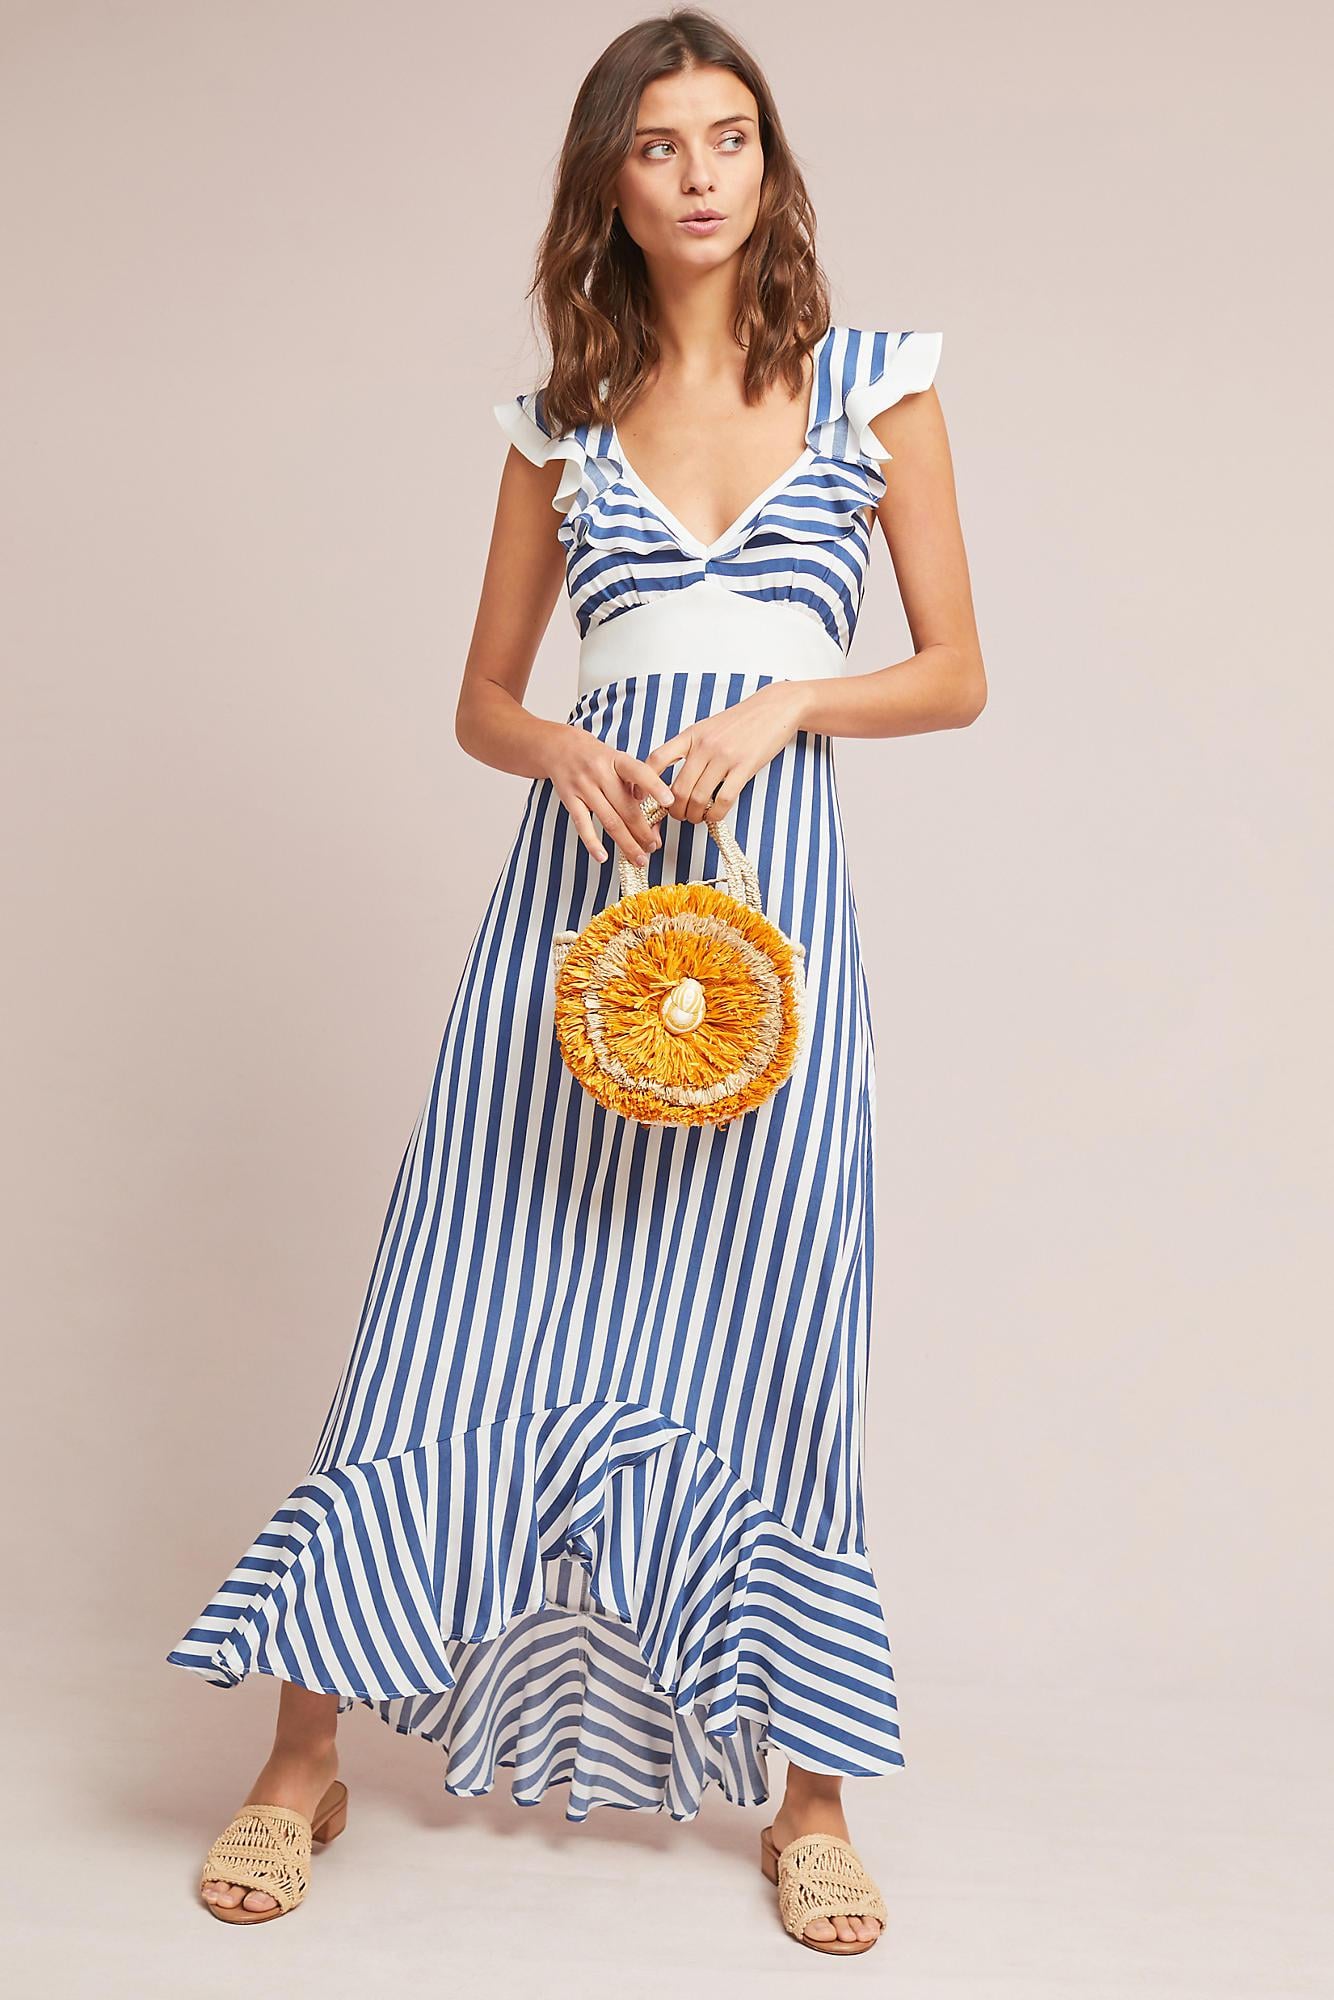 Habitually Chic® » Dresses and Accessories to Wear to Weddings